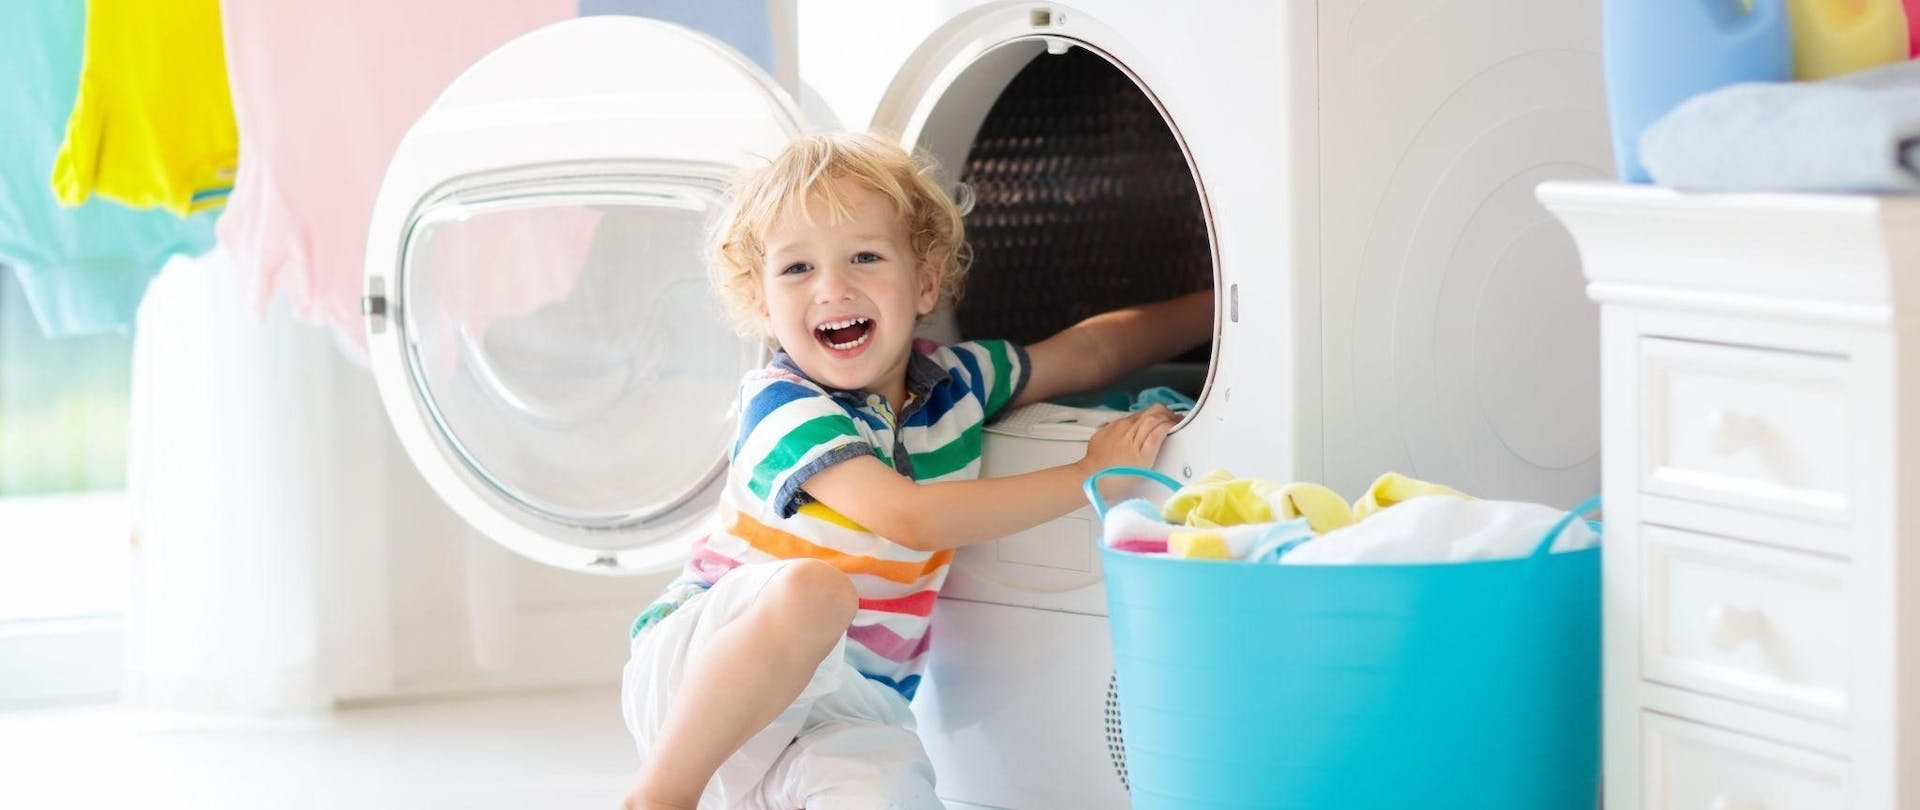 Water Softener Image of Child Taking out Laundry